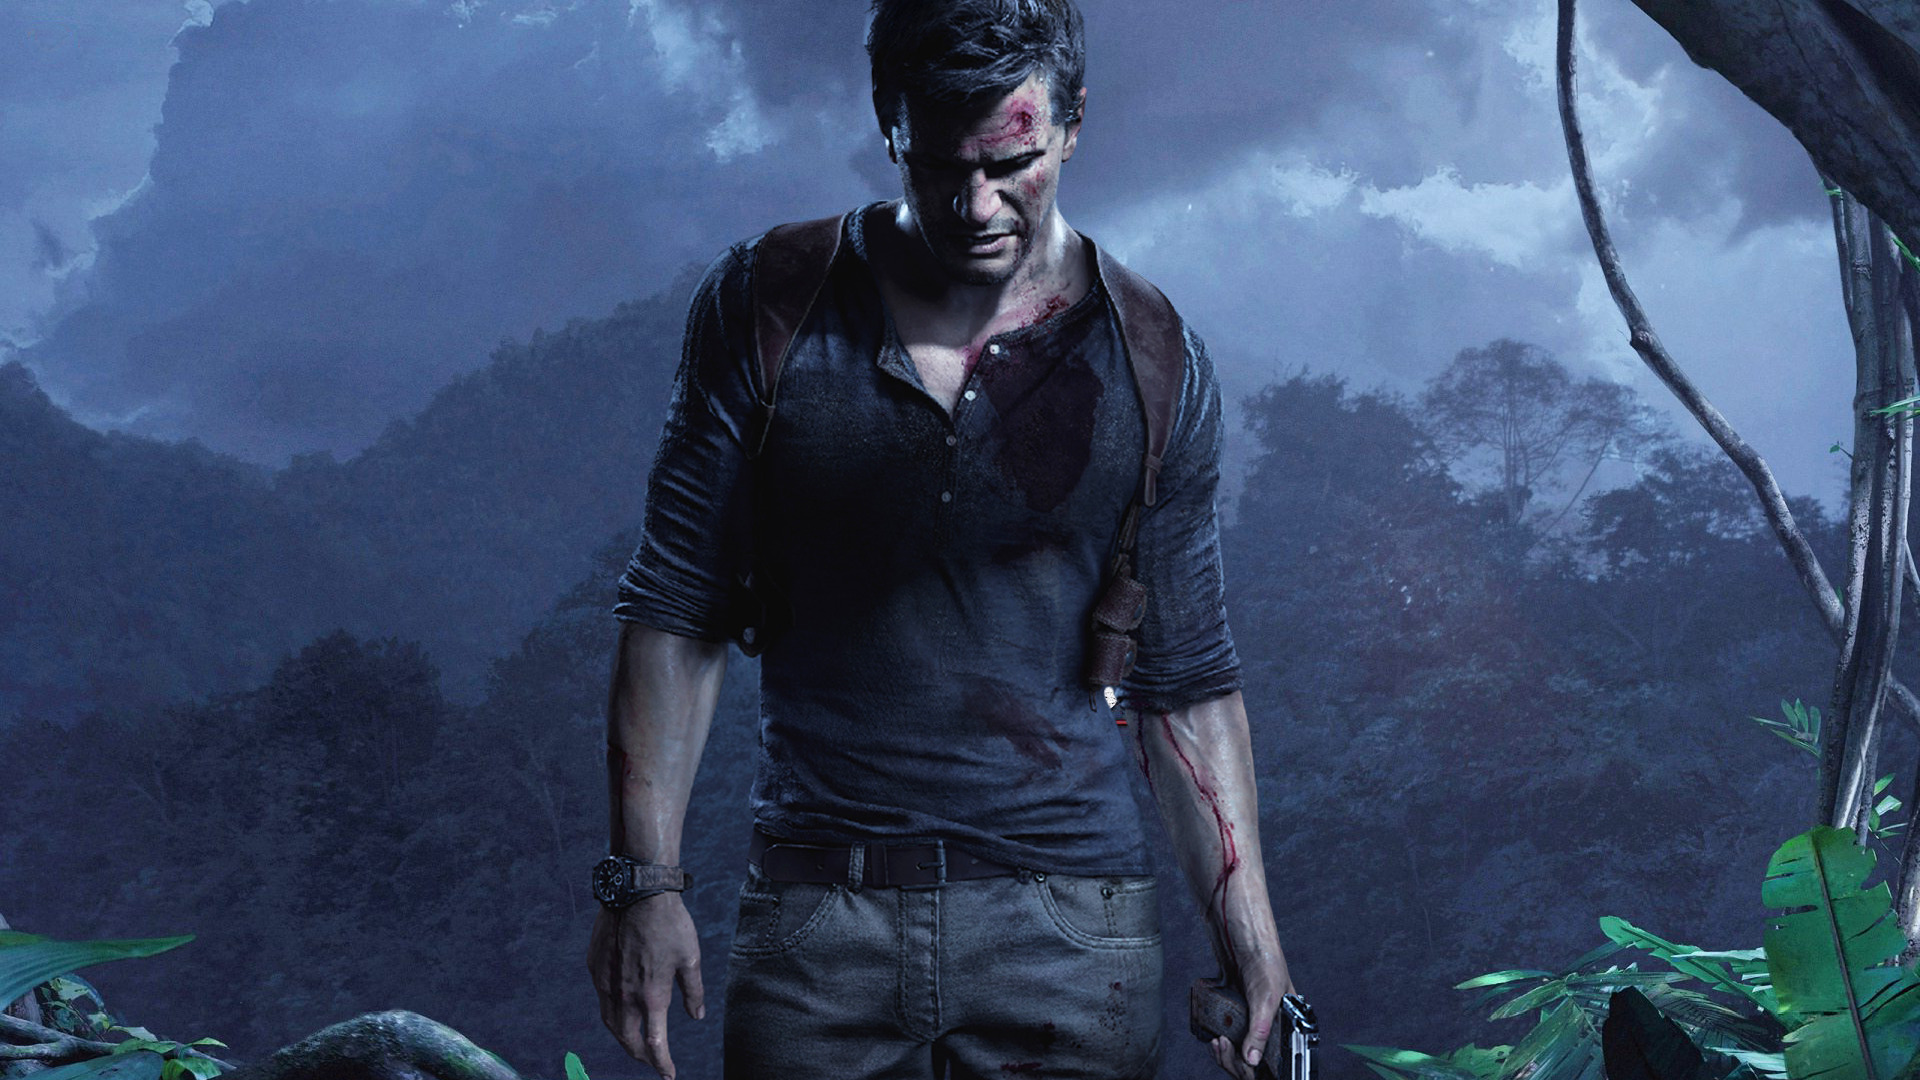 Uncharted 2 pc free download - garrymaple